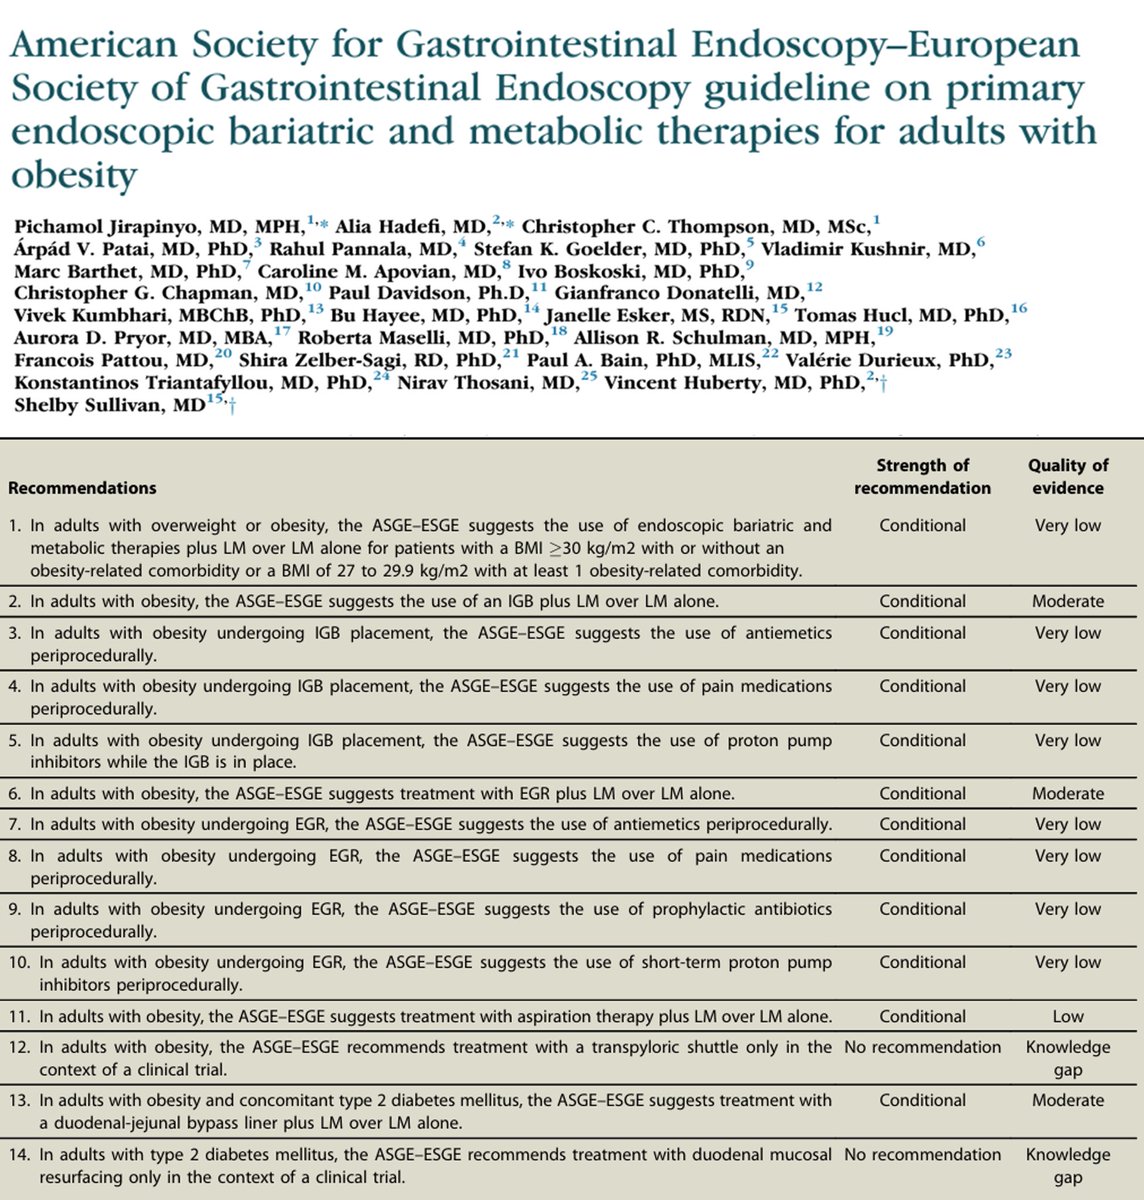 Check out @ASGEendoscopy @ESGE_news Guideline on Endoscopic Bariatric and Metabolic Therapies (EBMTs)! Based on meta-analyses/@USGRADEnet, we suggest 👉EBMTs+LM for BMI >=30 or >=27 w comorbidity 👉Intragastric balloon or endoscopic gastric remodeling+LM tinyurl.com/yt72y7k5